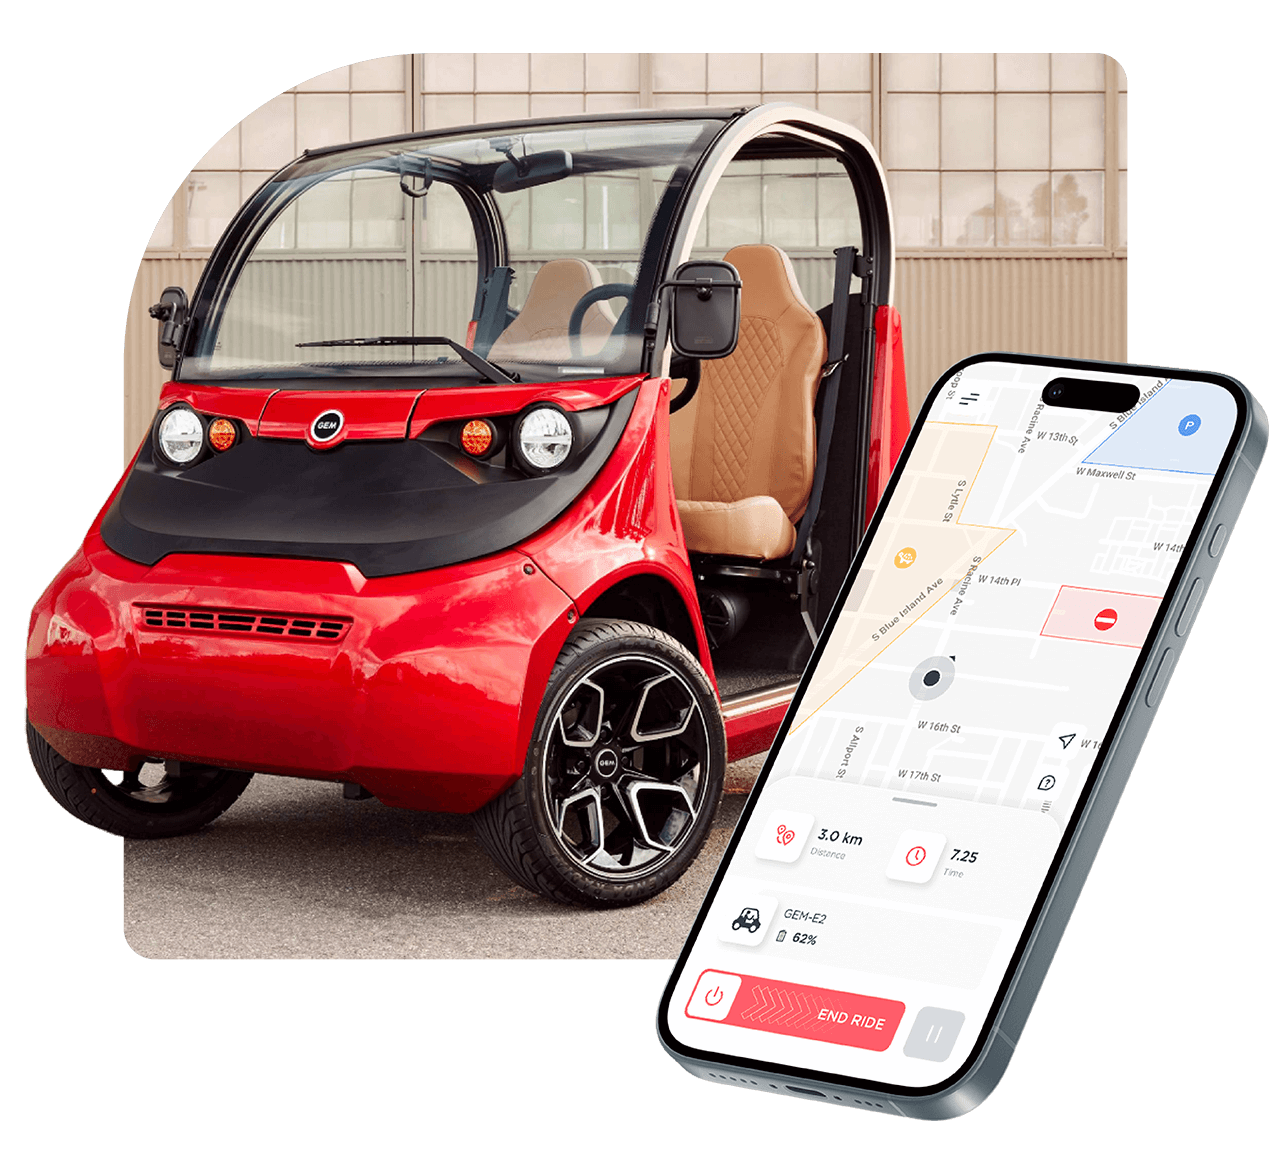 red Gem e2 low speed vehicle with Joyride Rider App on an iphone